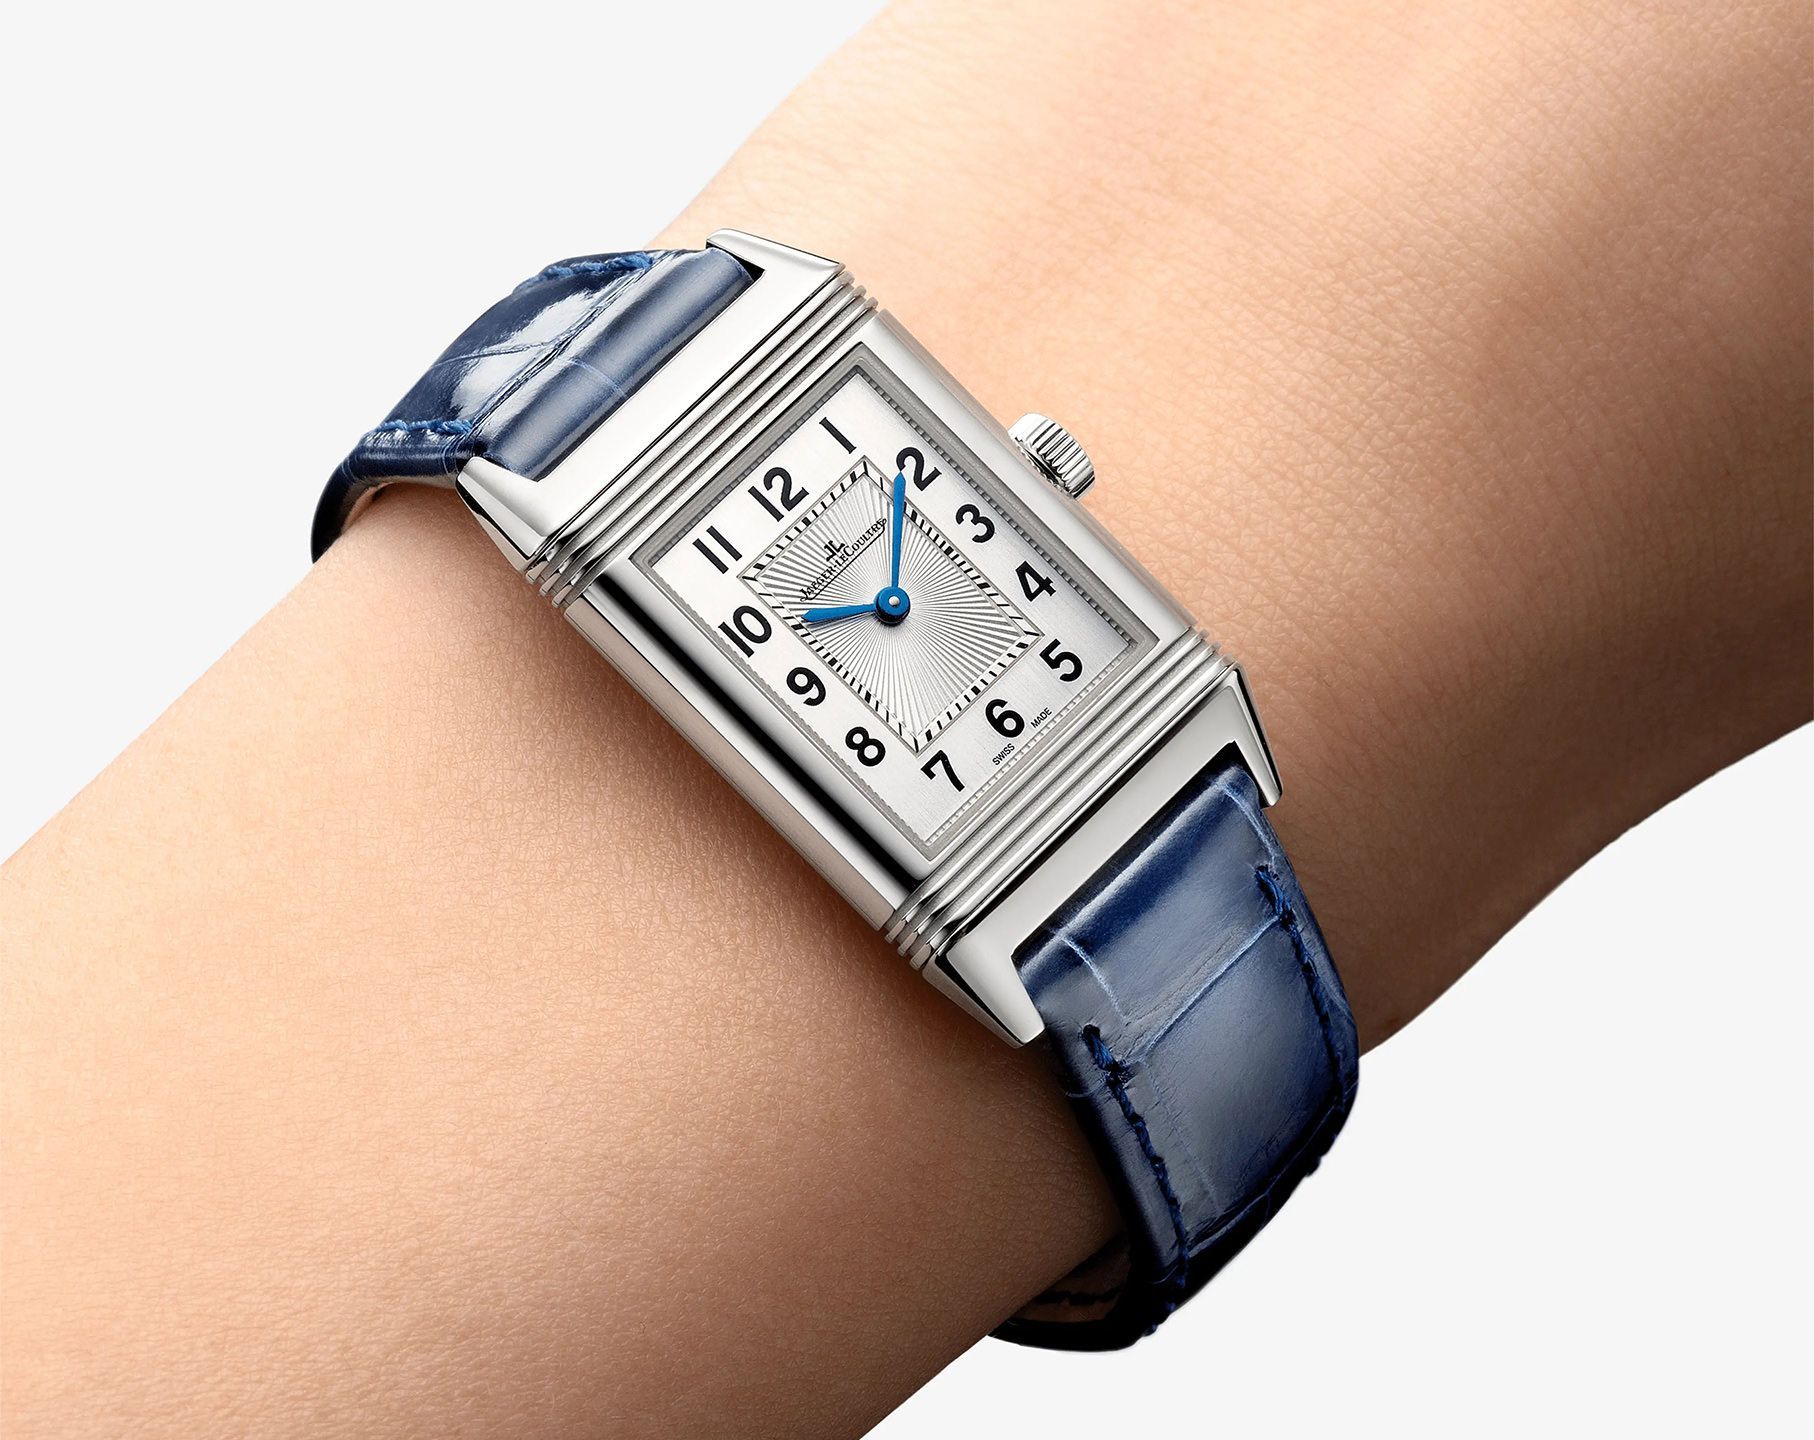 Jaeger-LeCoultre Reverso Reverso Classic Silver Dial 21 mm Manual Winding Watch For Women - 4